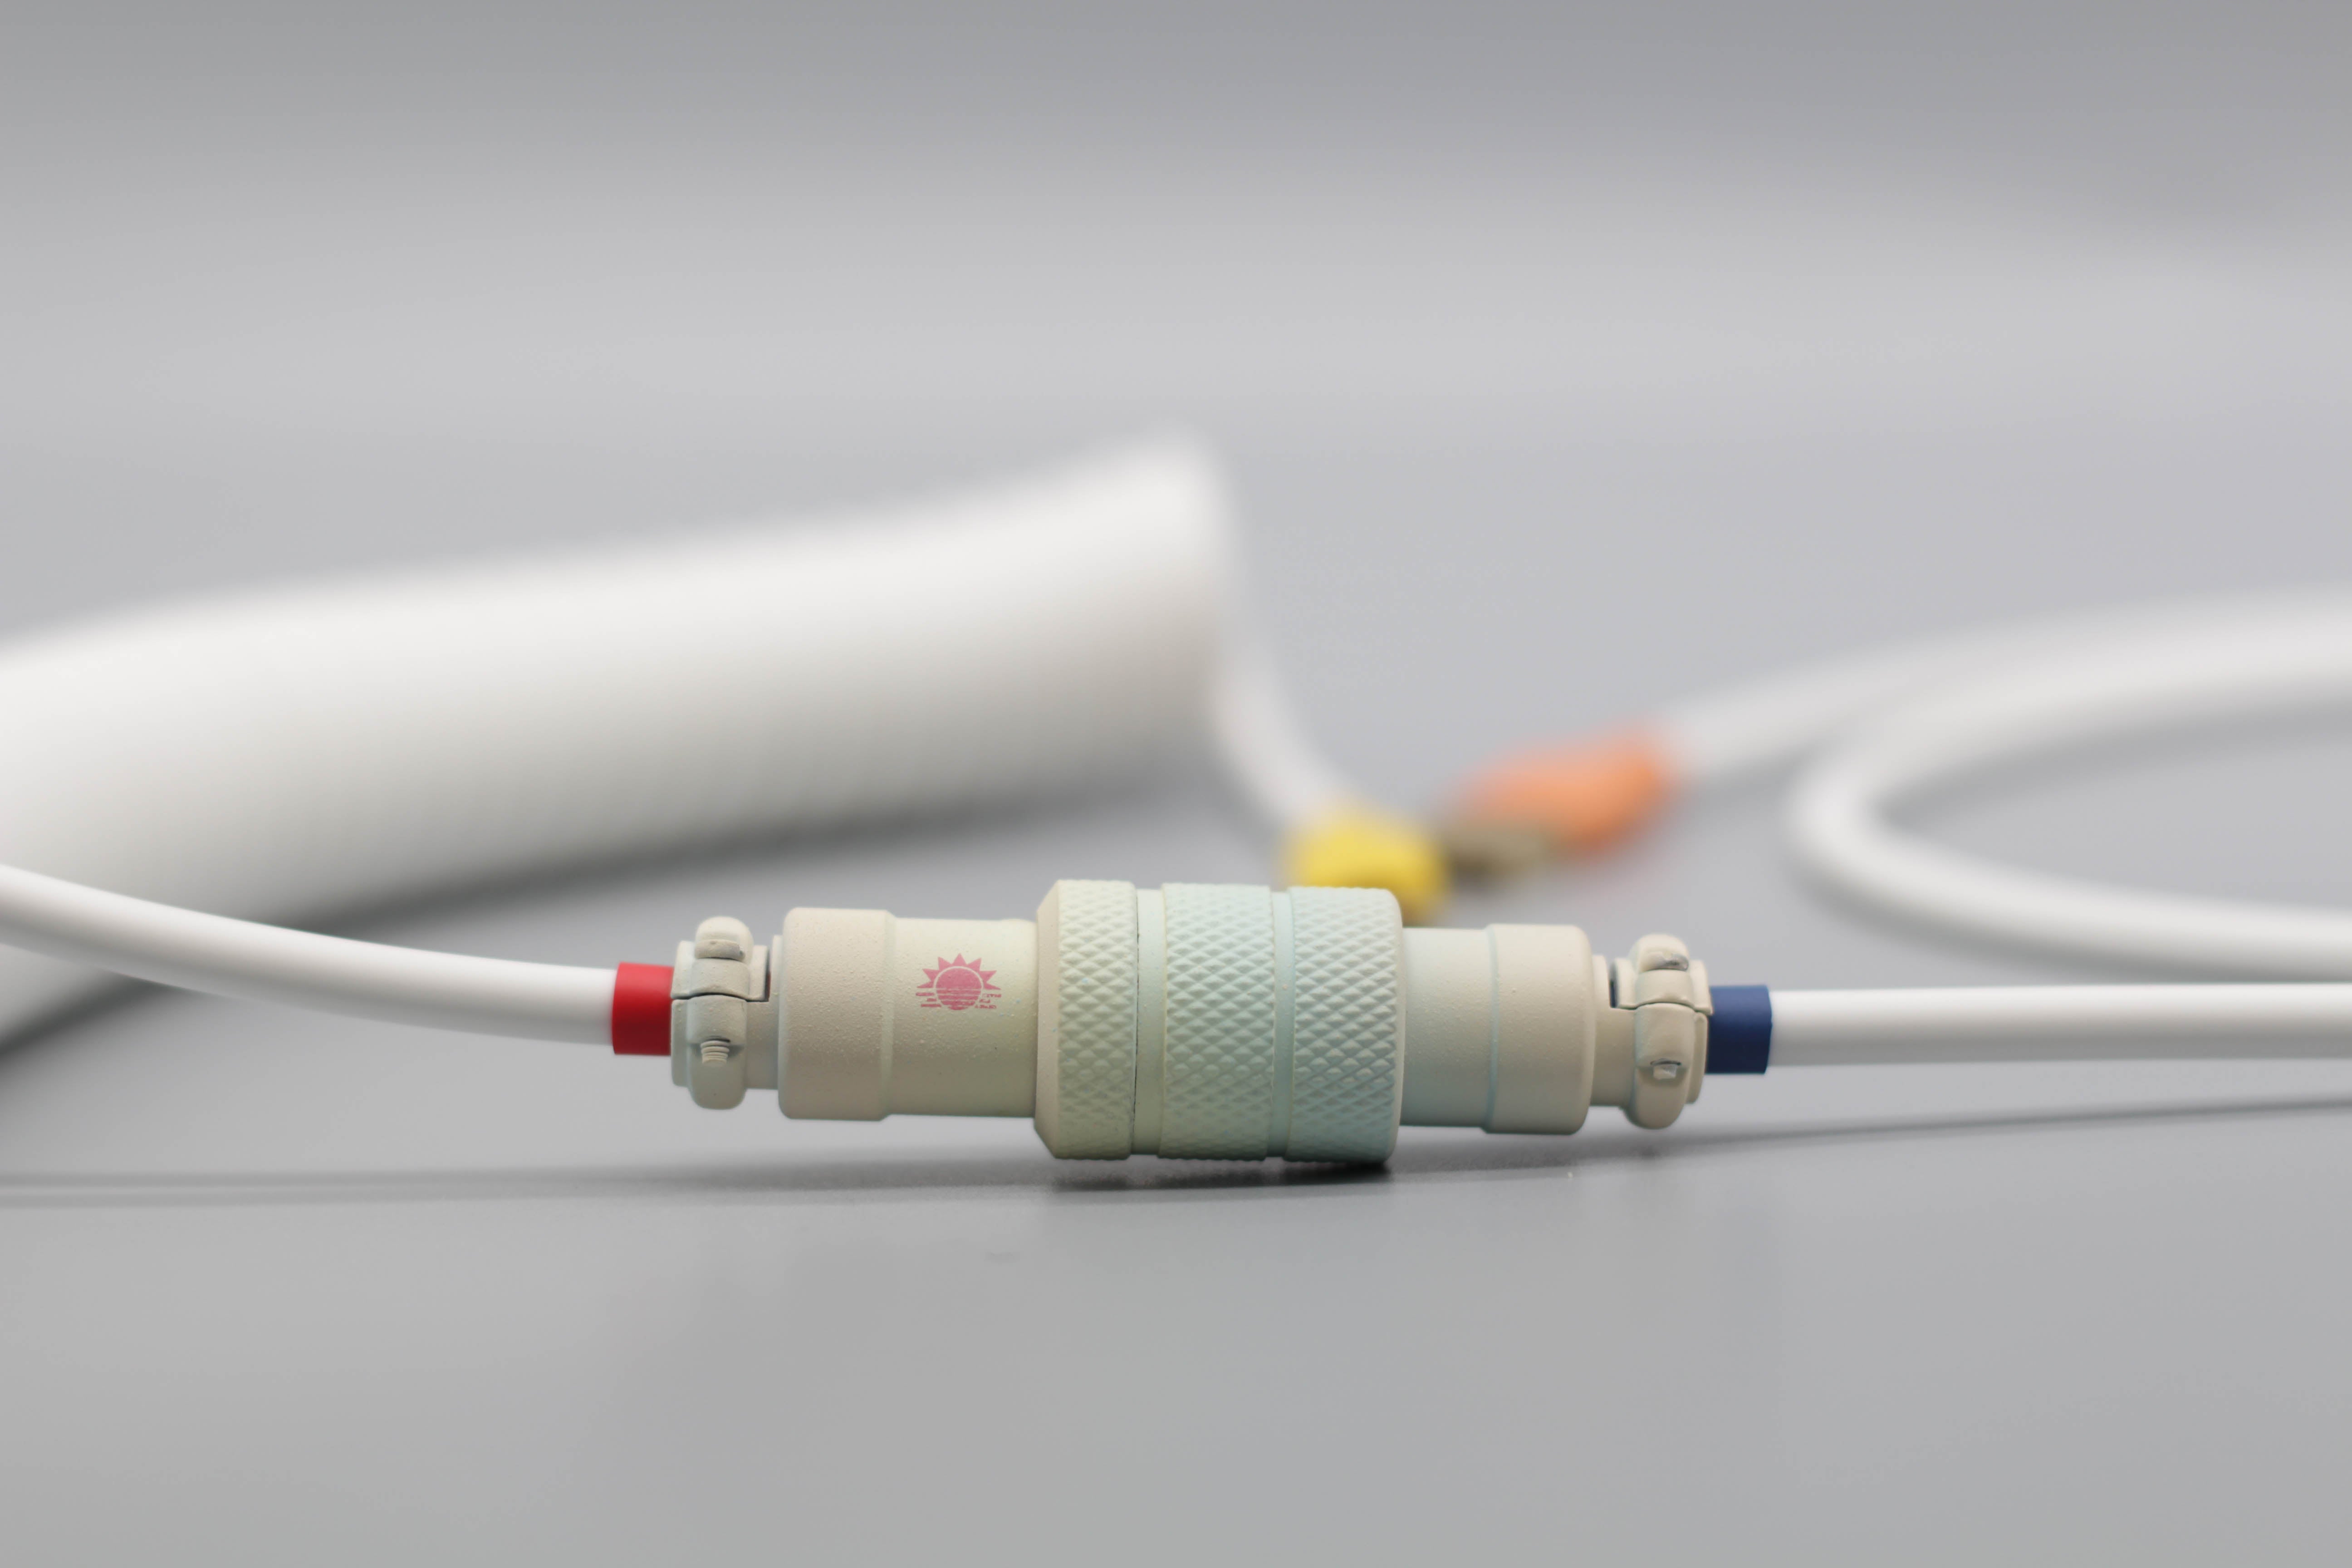 [GB] Milkyway Coloradas Cable (Official Collab)